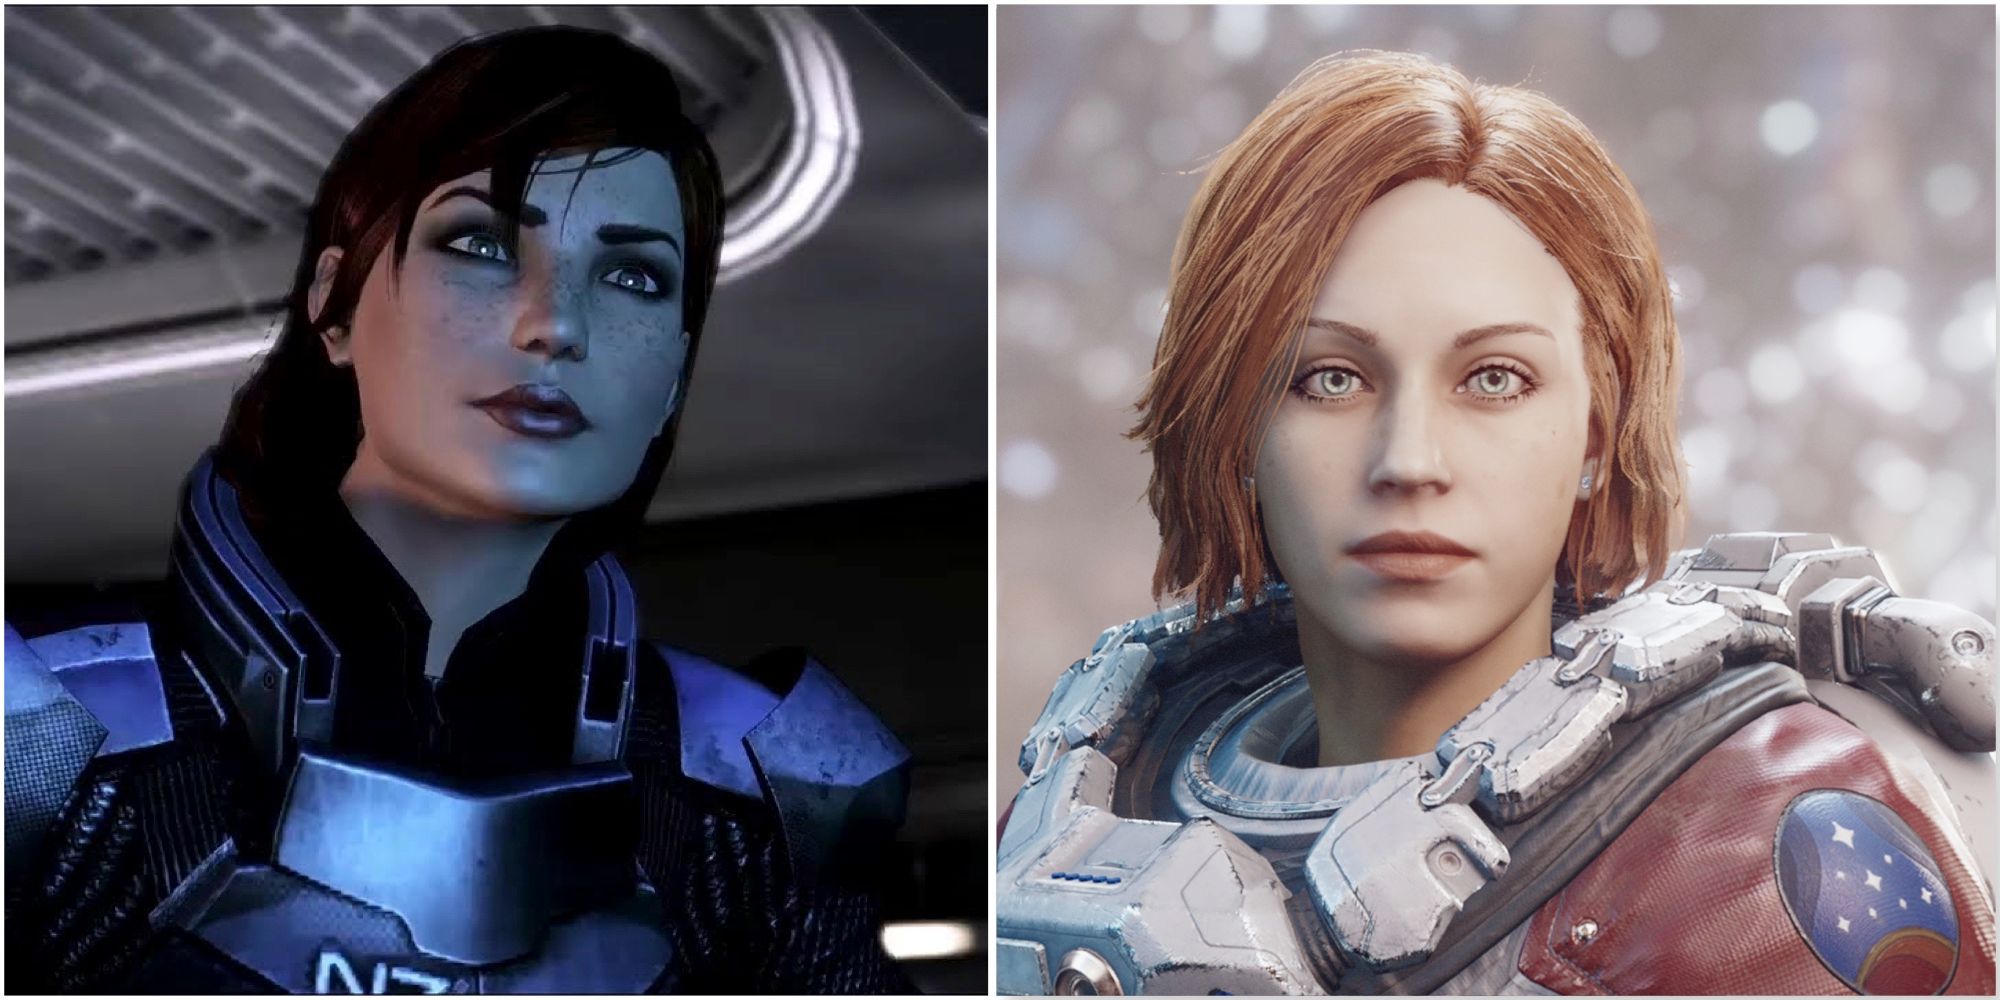 Female Shepard in Mass Effect and your character in Starfield